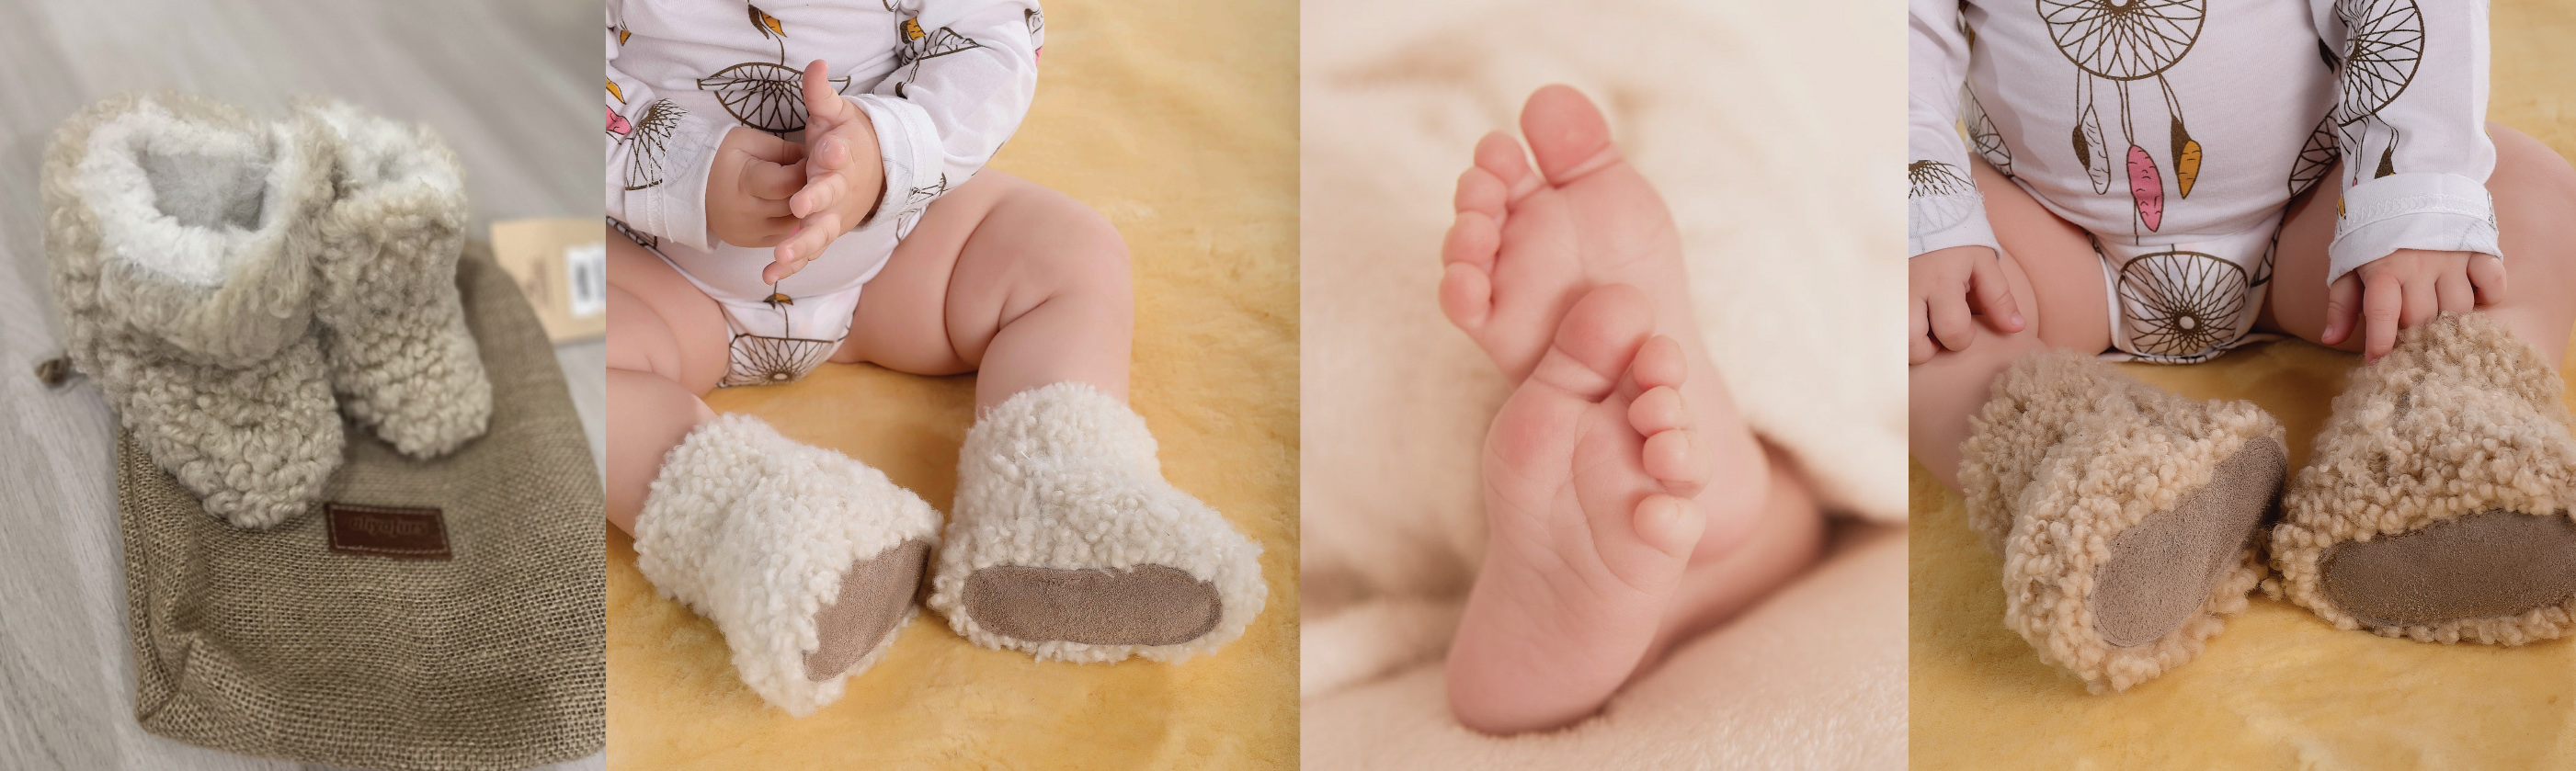 sheepskin boots for baby